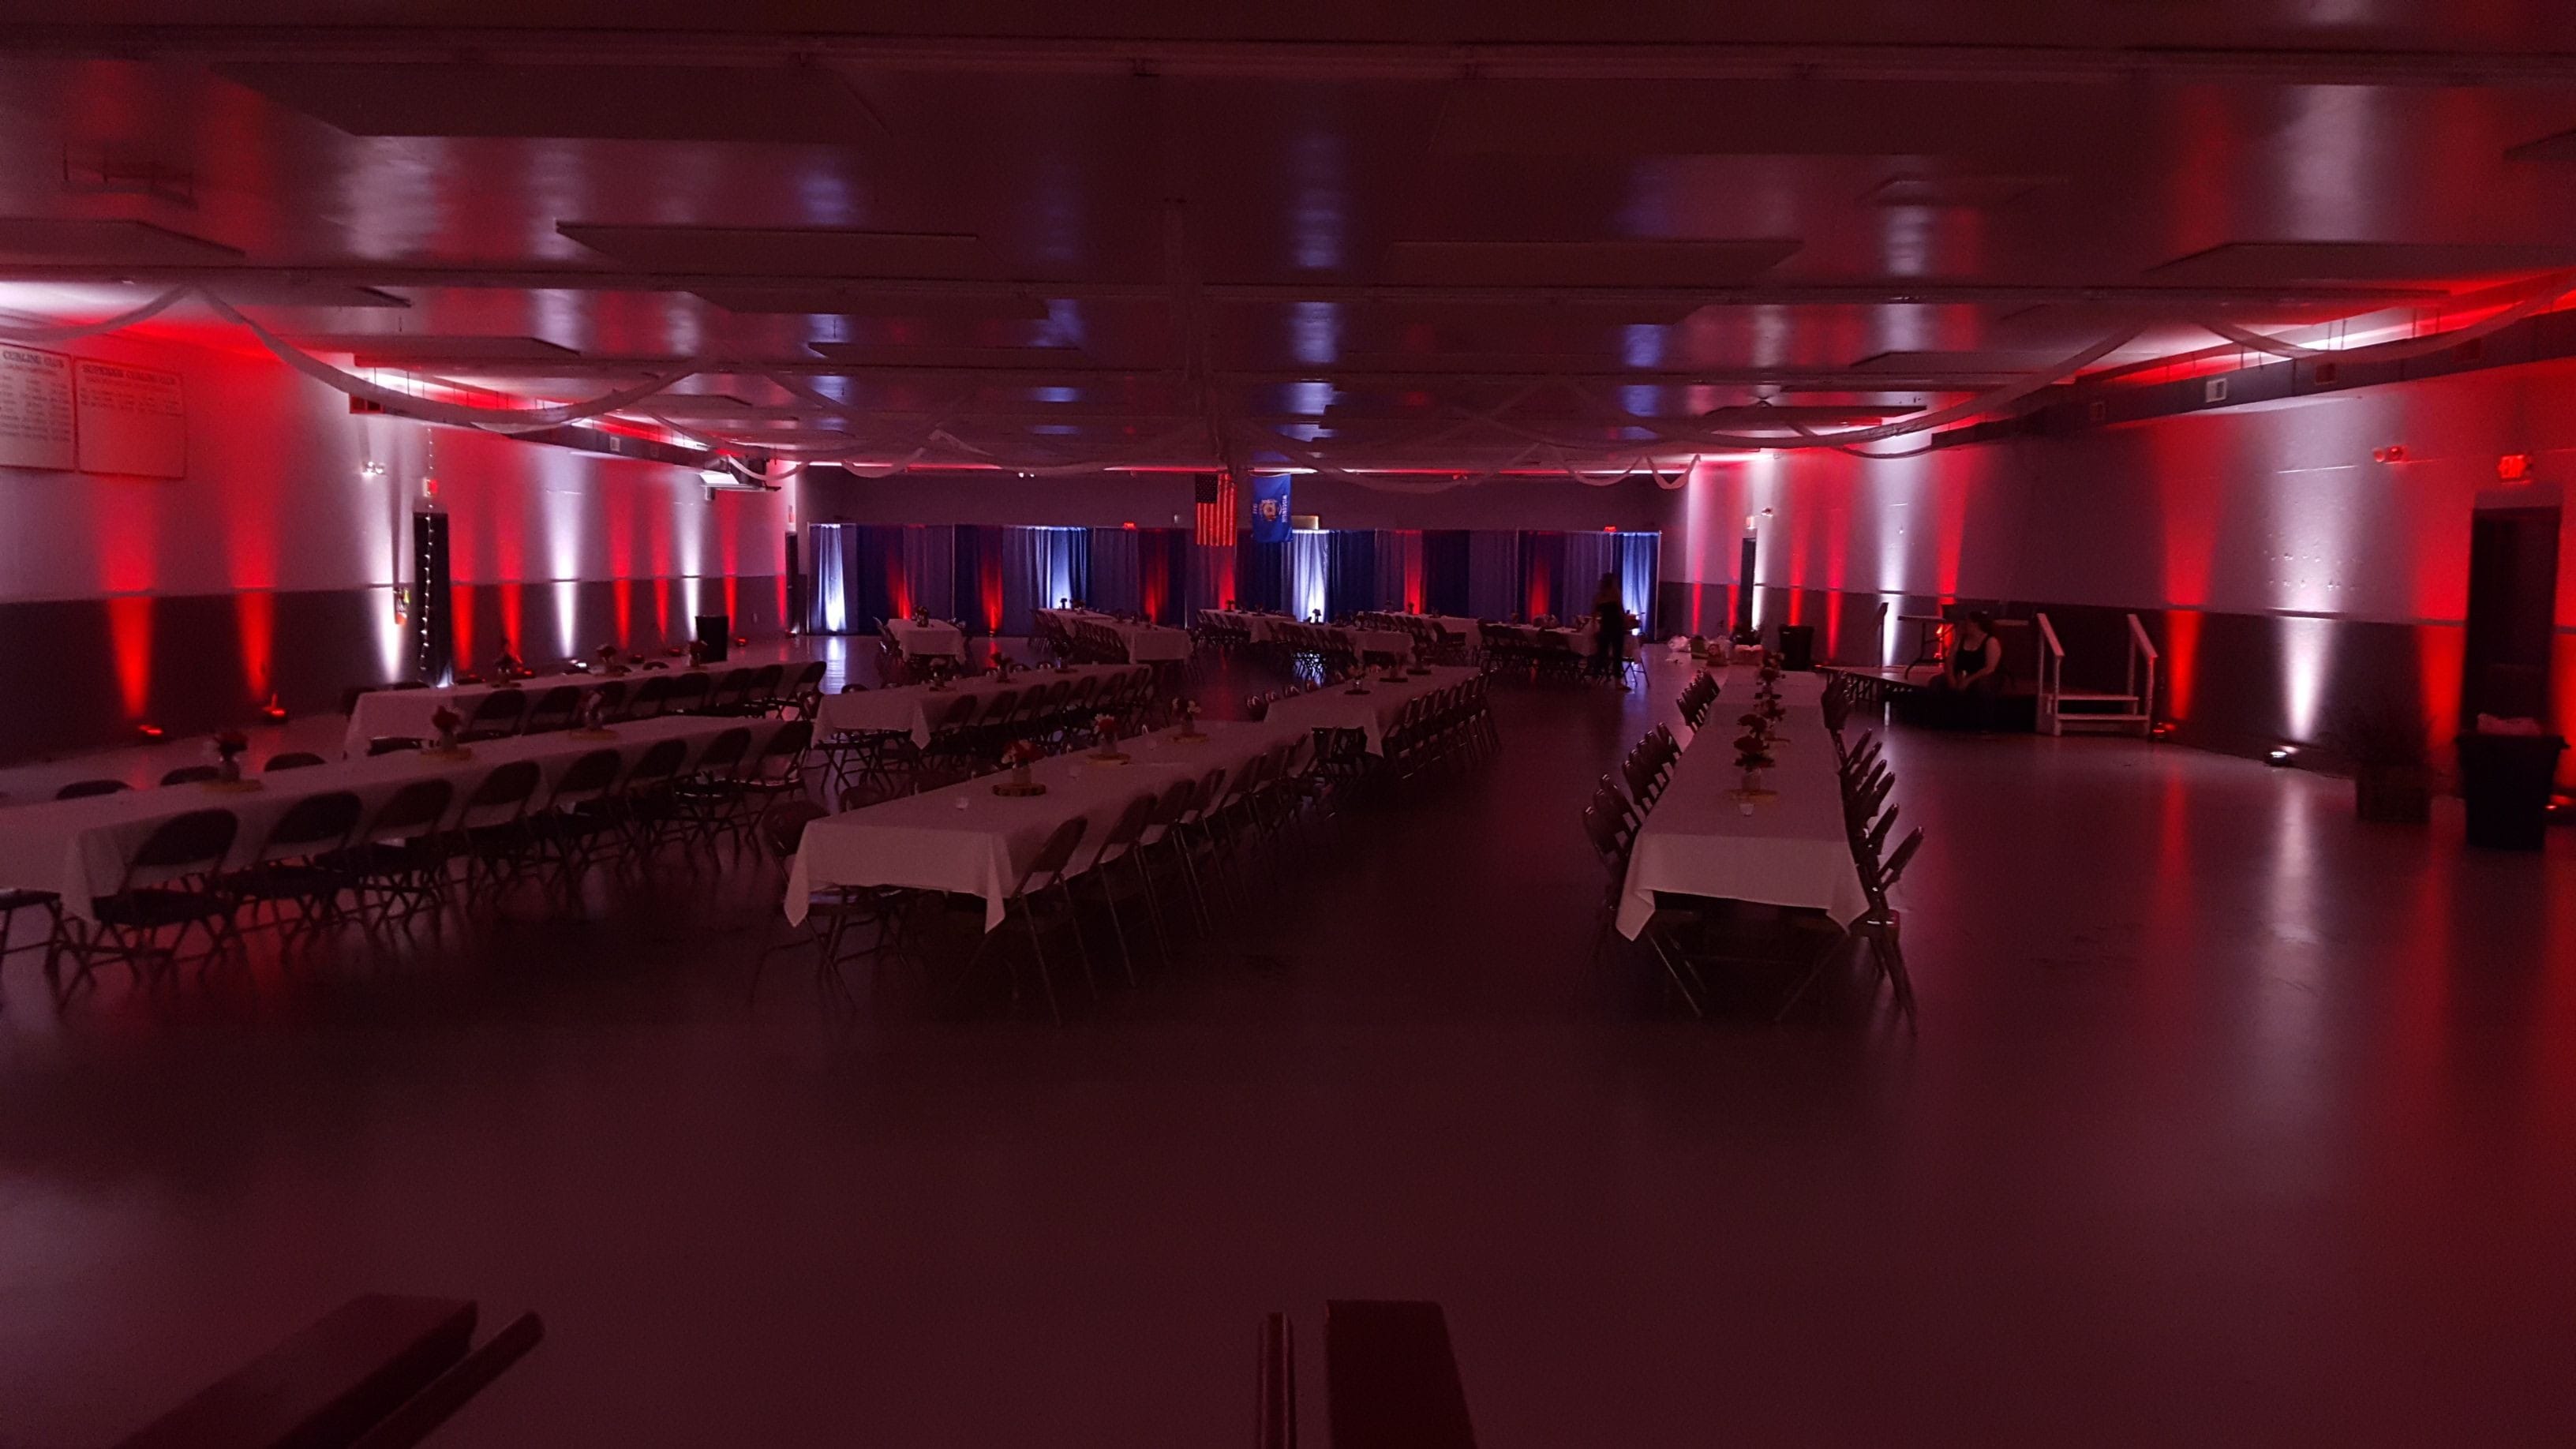 Superior Curling Club.
Up lighting in a dim red and white for a wedding.